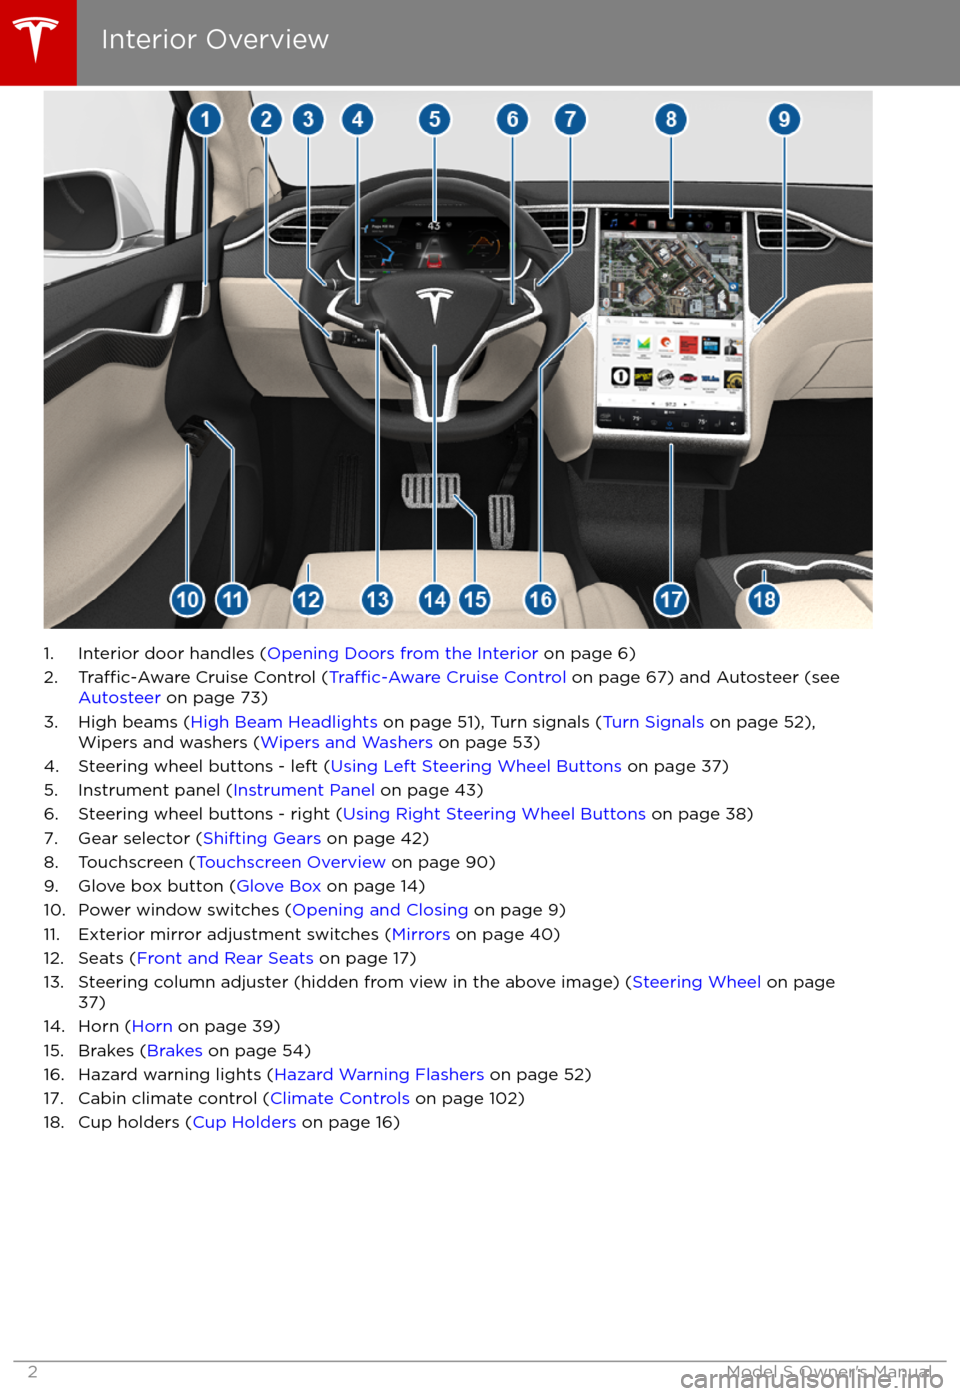 TESLA MODEL S 2017  Owners Manual 1. Interior door handles (Opening Doors from the Interior  on page 6)
2.Traffic-Aware Cruise Control (Traffic-Aware Cruise Control  on page 67) and Autosteer (see 
Autosteer  on page 73)
3. High beams